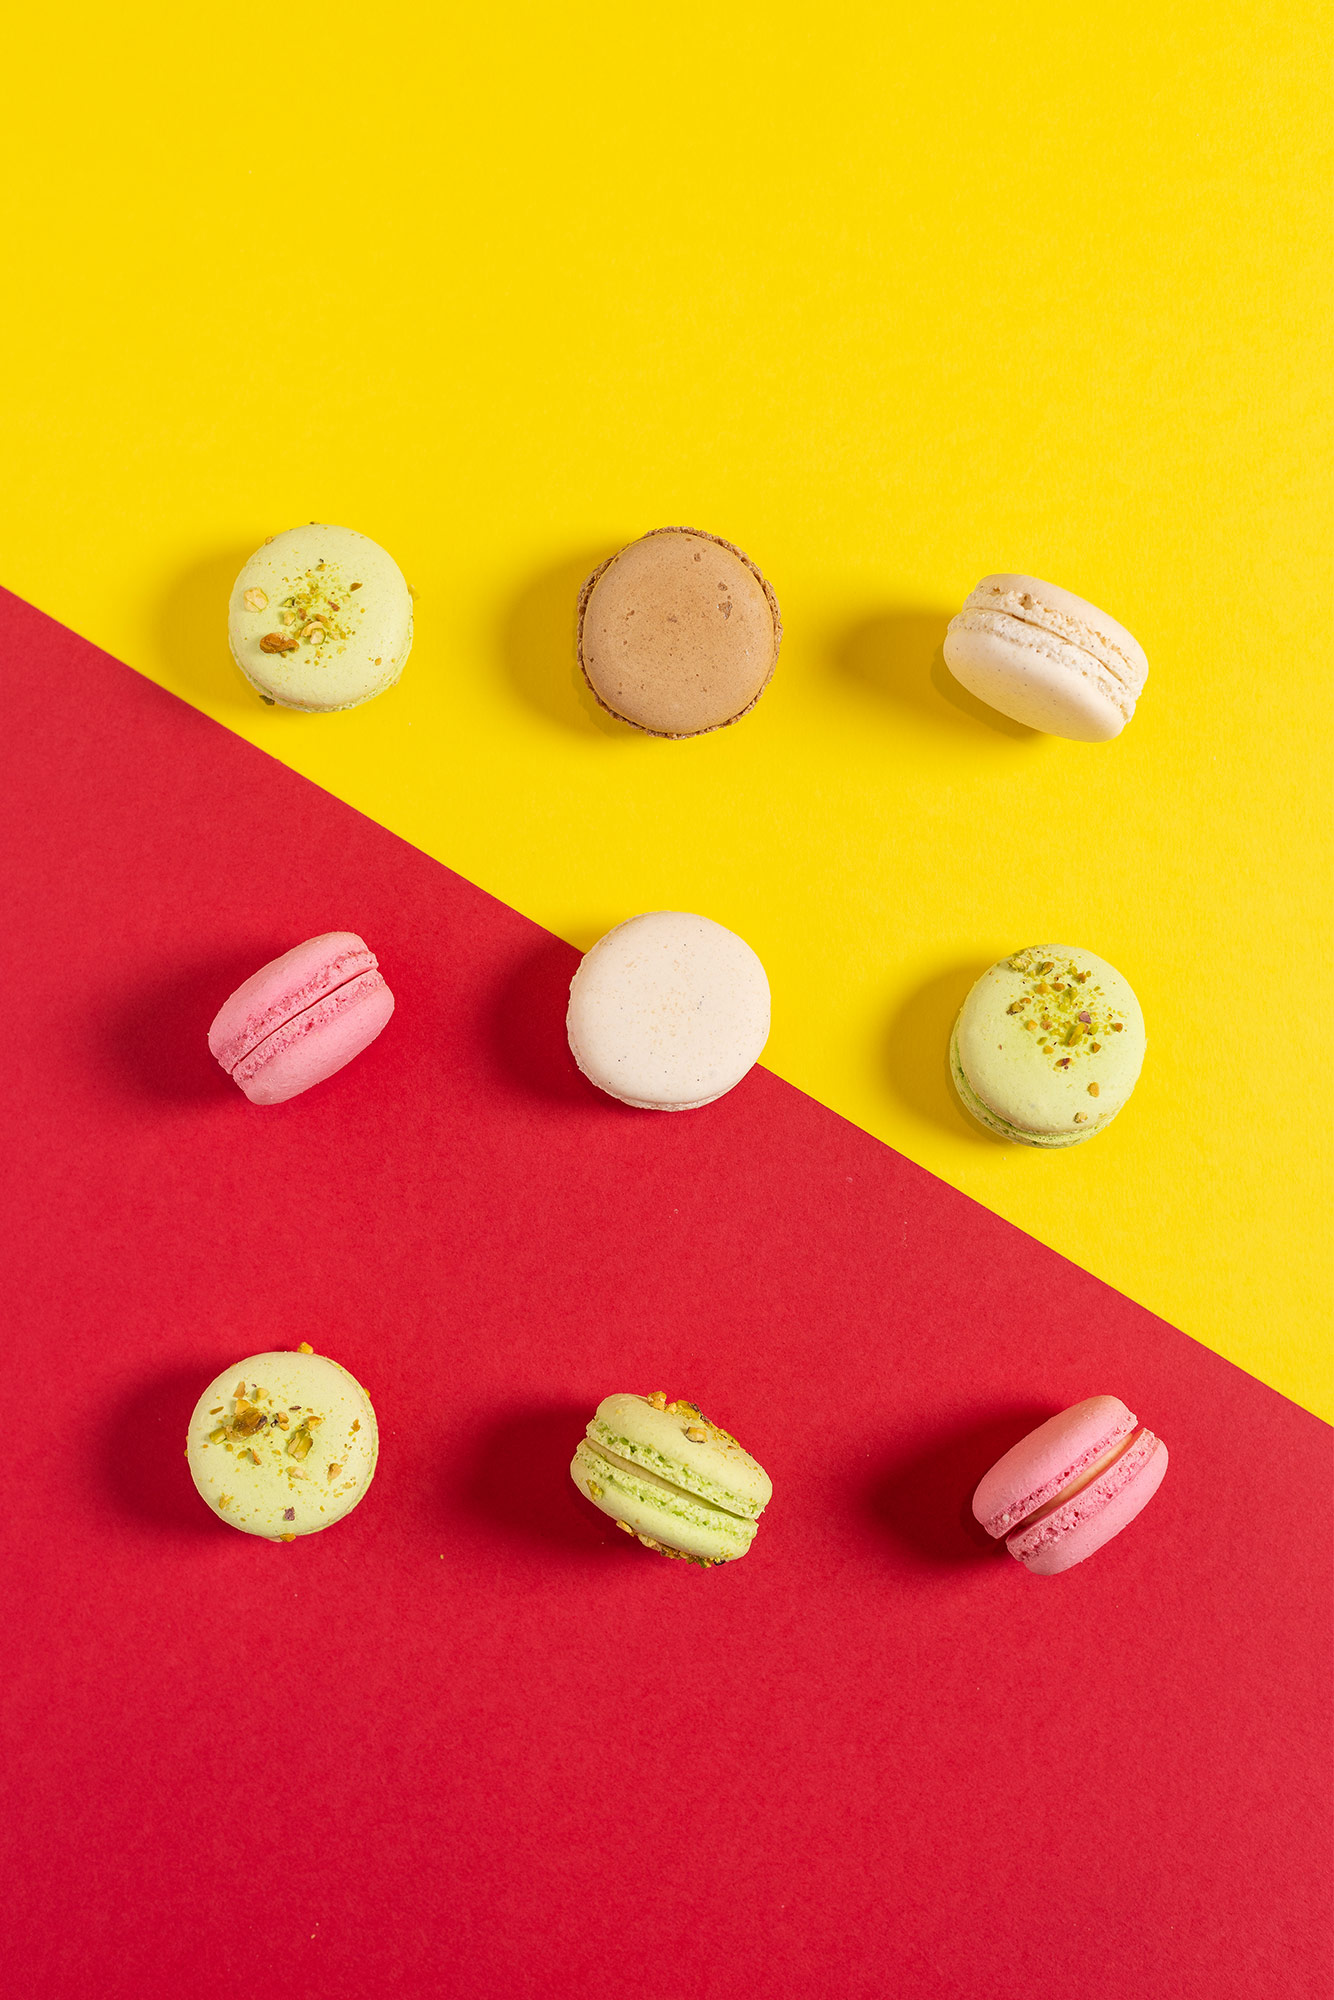 Food photographer Scott Cameron Baxter. Pictures shows 9 macarons from a birdseye view on a half yellow and red table. The colour difference is at a 45 degree angle, yellow at the top, red at the bottom. with the centre macaron splitting the two colours.